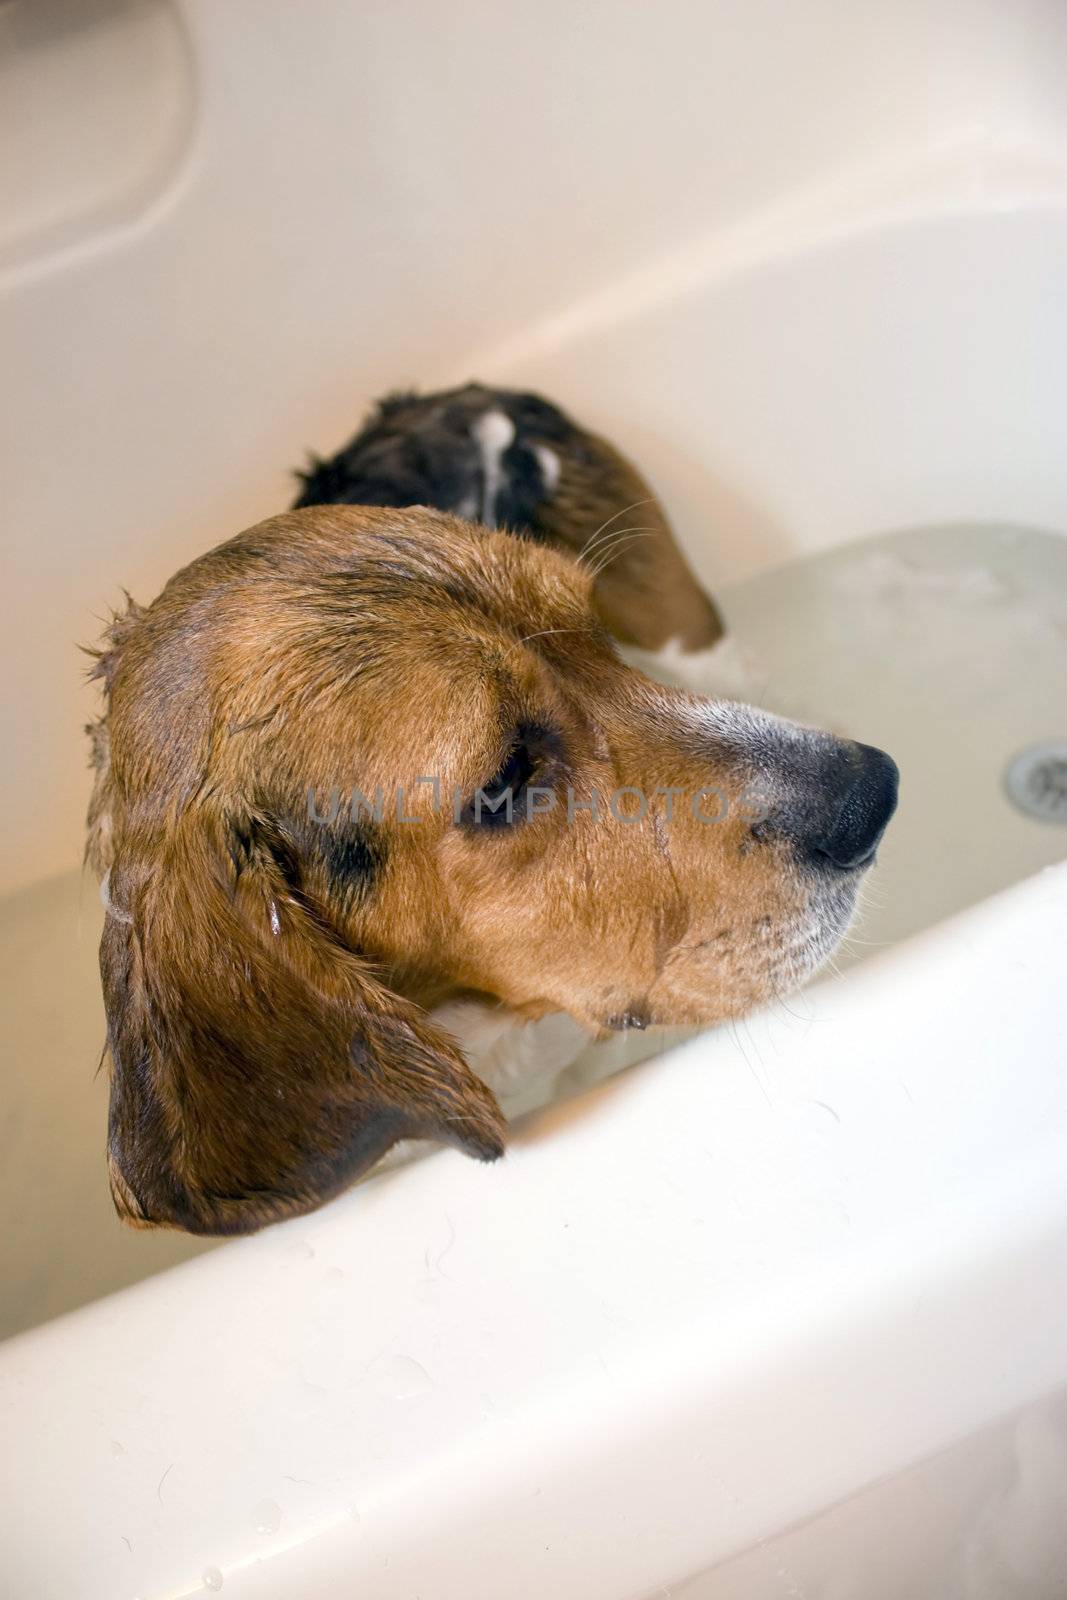 A beagle sitting in the bath tub. He doesn't seem to be having a great time.